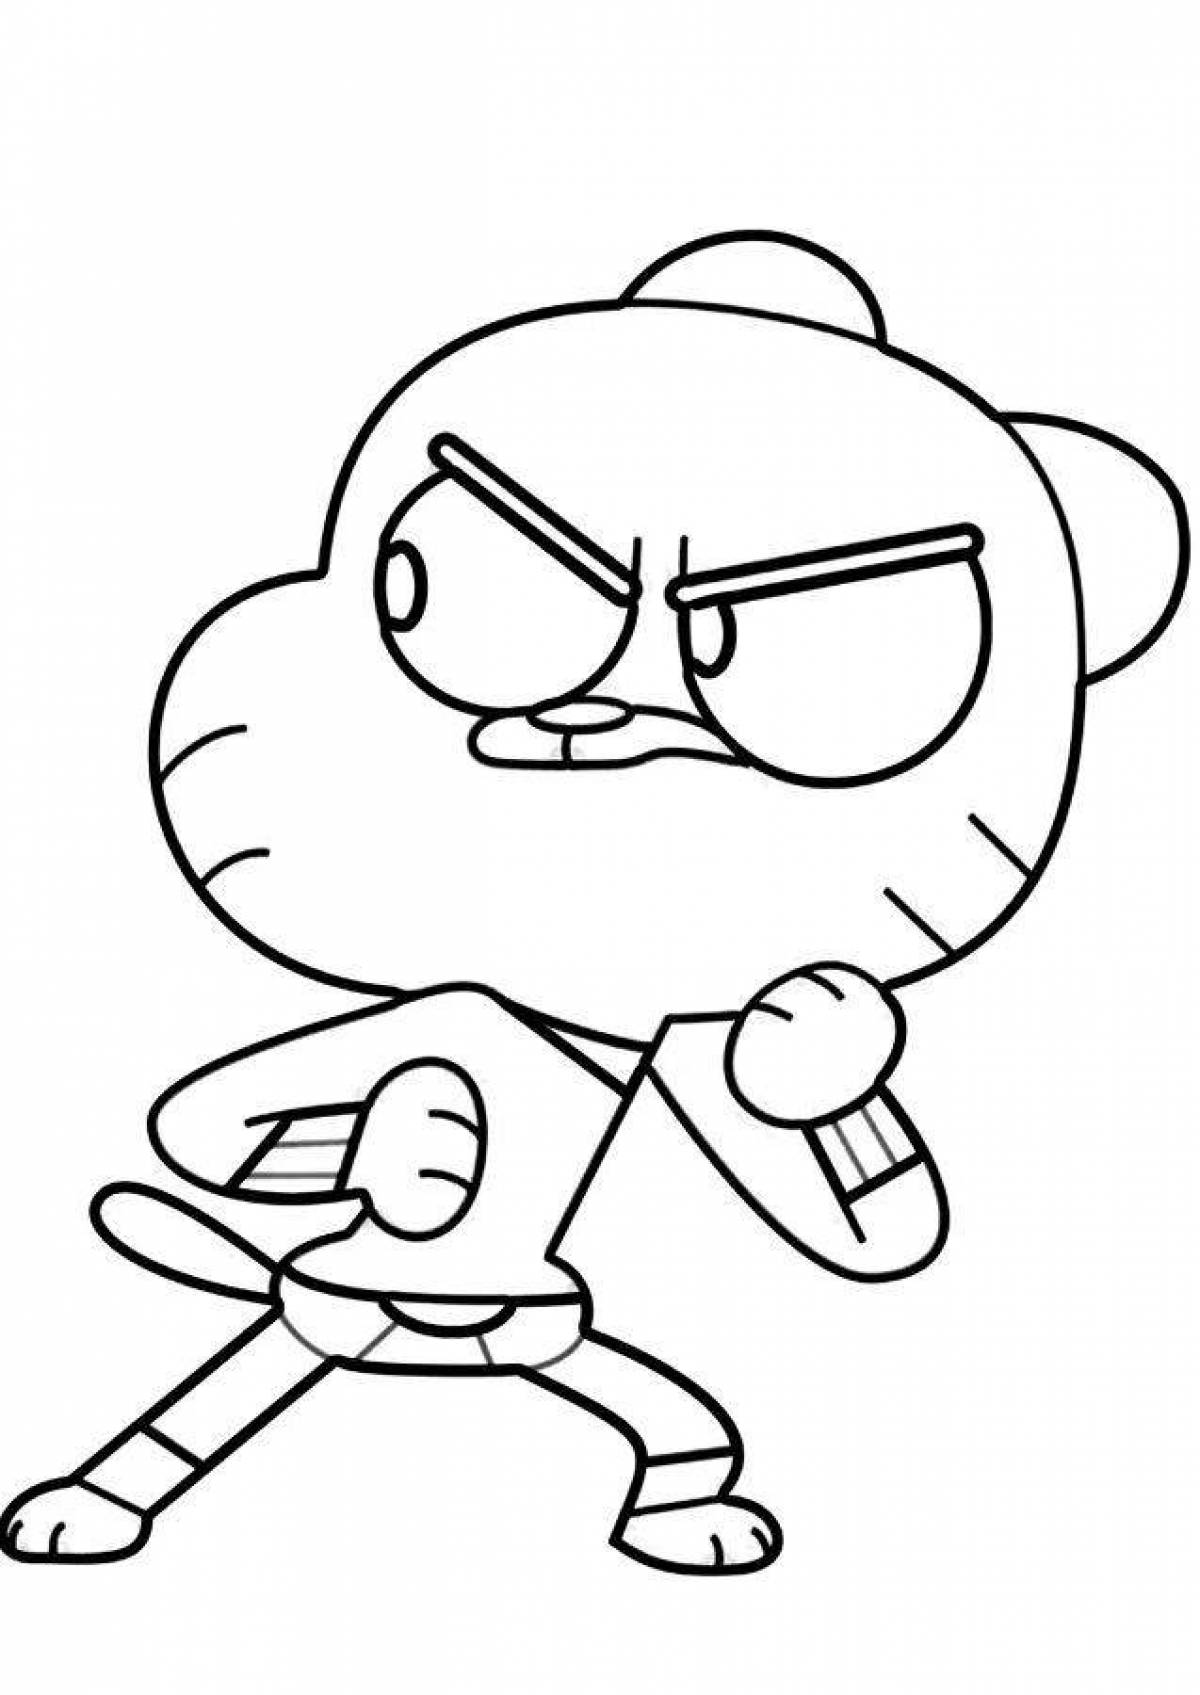 Gumball Animated Coloring Page